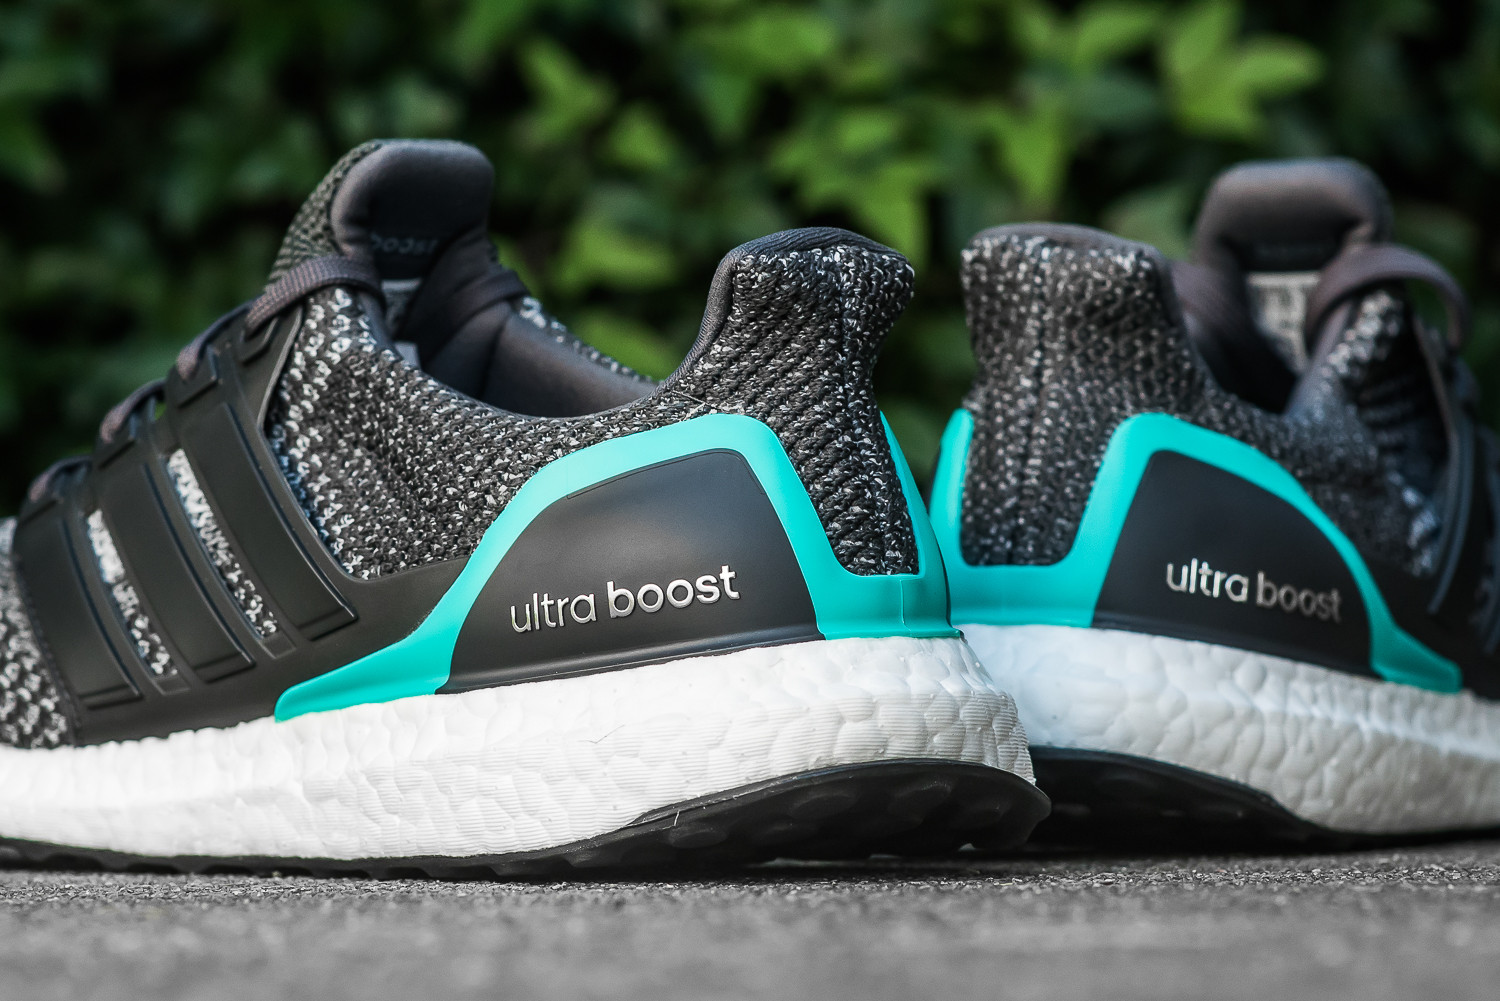 The adidas Ultra Boost 'Shock Mint' is 